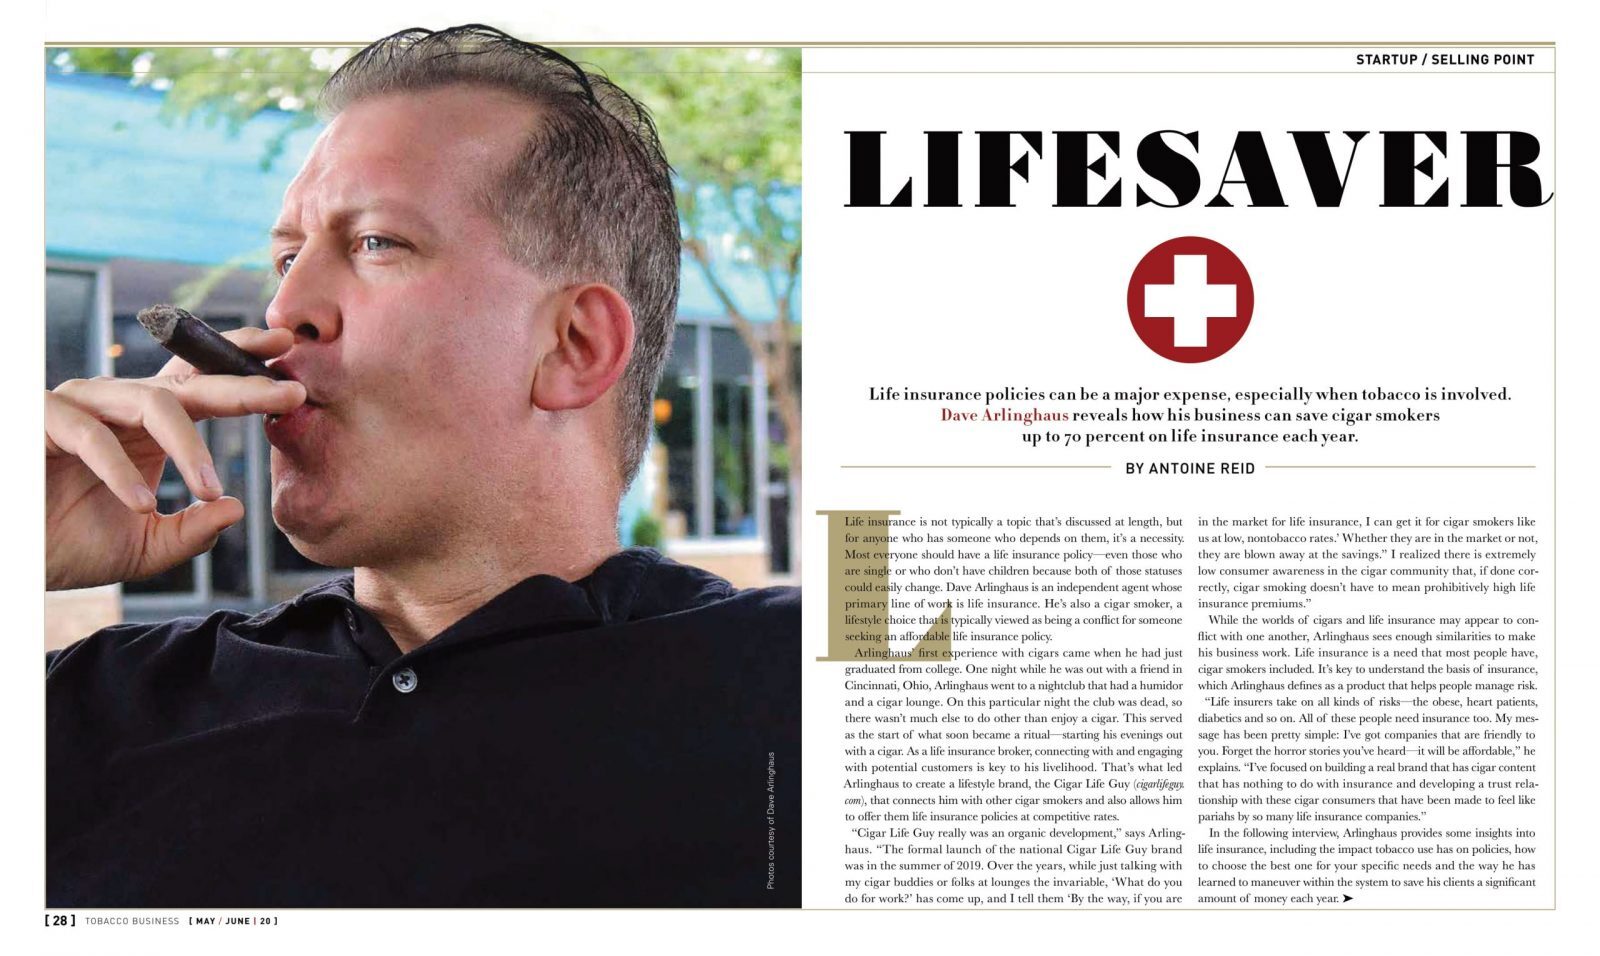 Cigar Life Guy, Dave Arlignhaus featured in Tobacco Business magazine